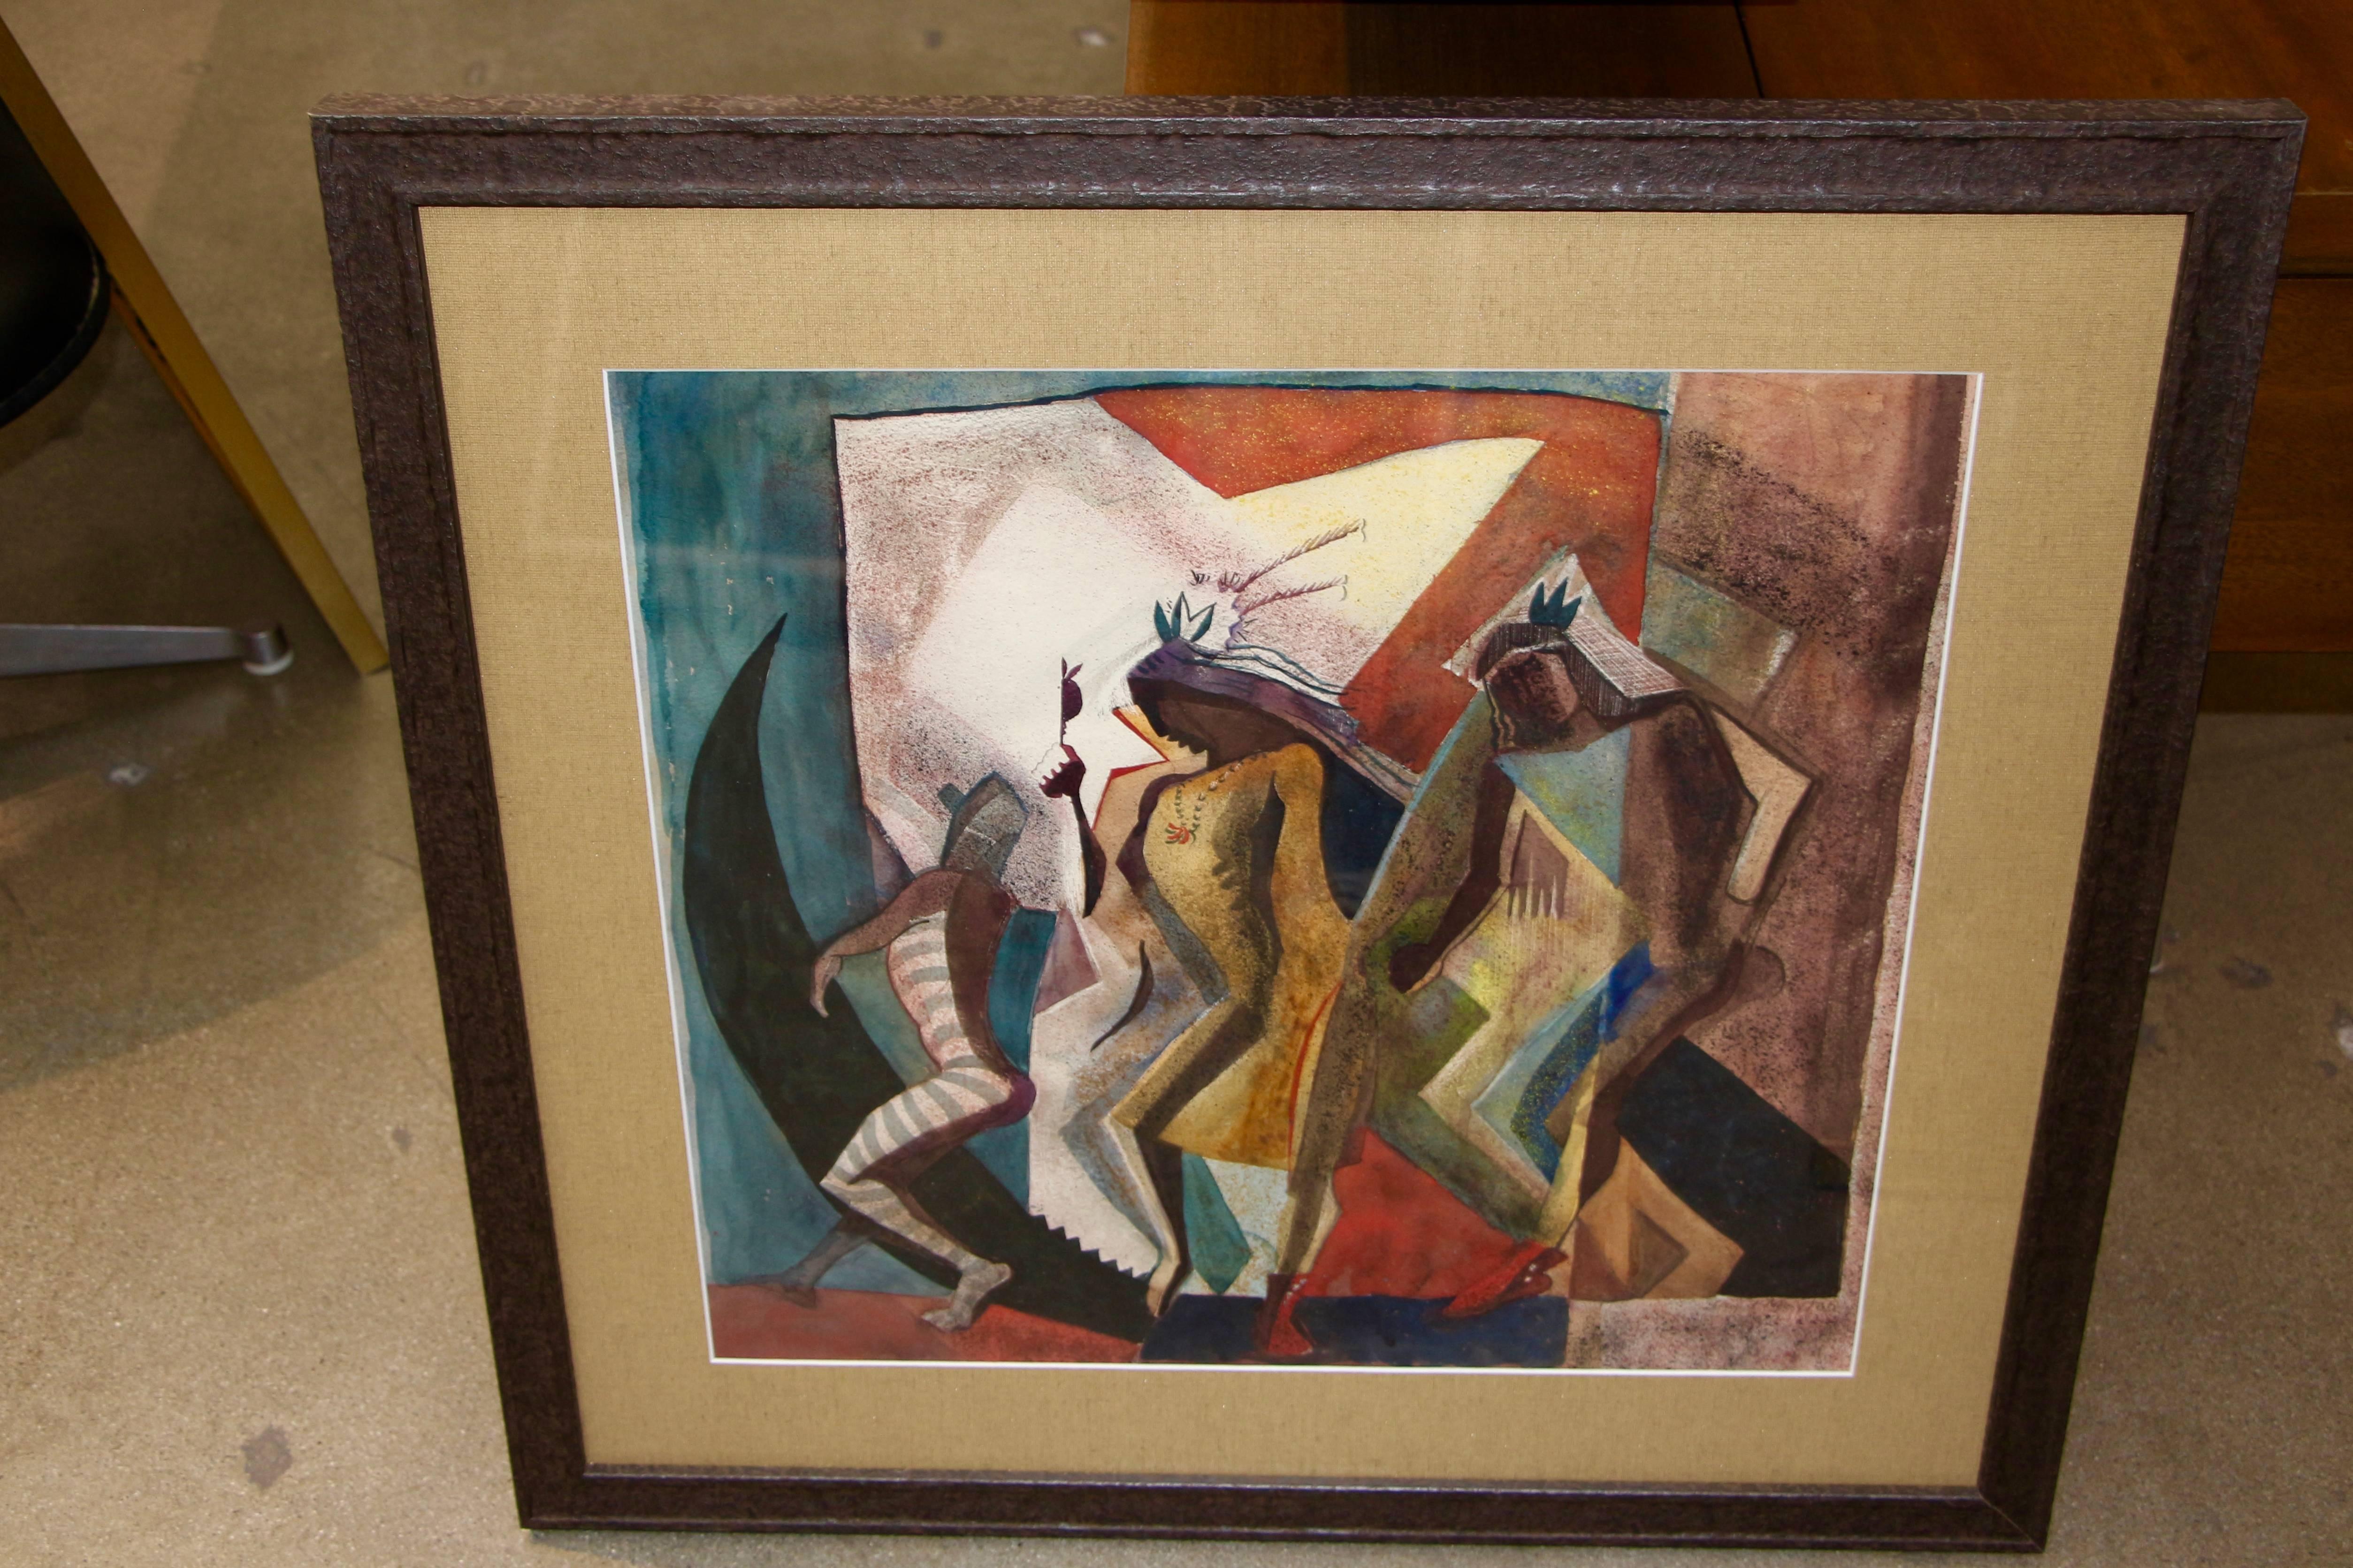 A cubist feeling Native American Indian themed mixed media painting on paper by the noted Southwest painter Lloyd Moylan (1893-1963). It has been re-framed and re-matted. It is marked Dancers on the back of the painting. A beautiful painting by a